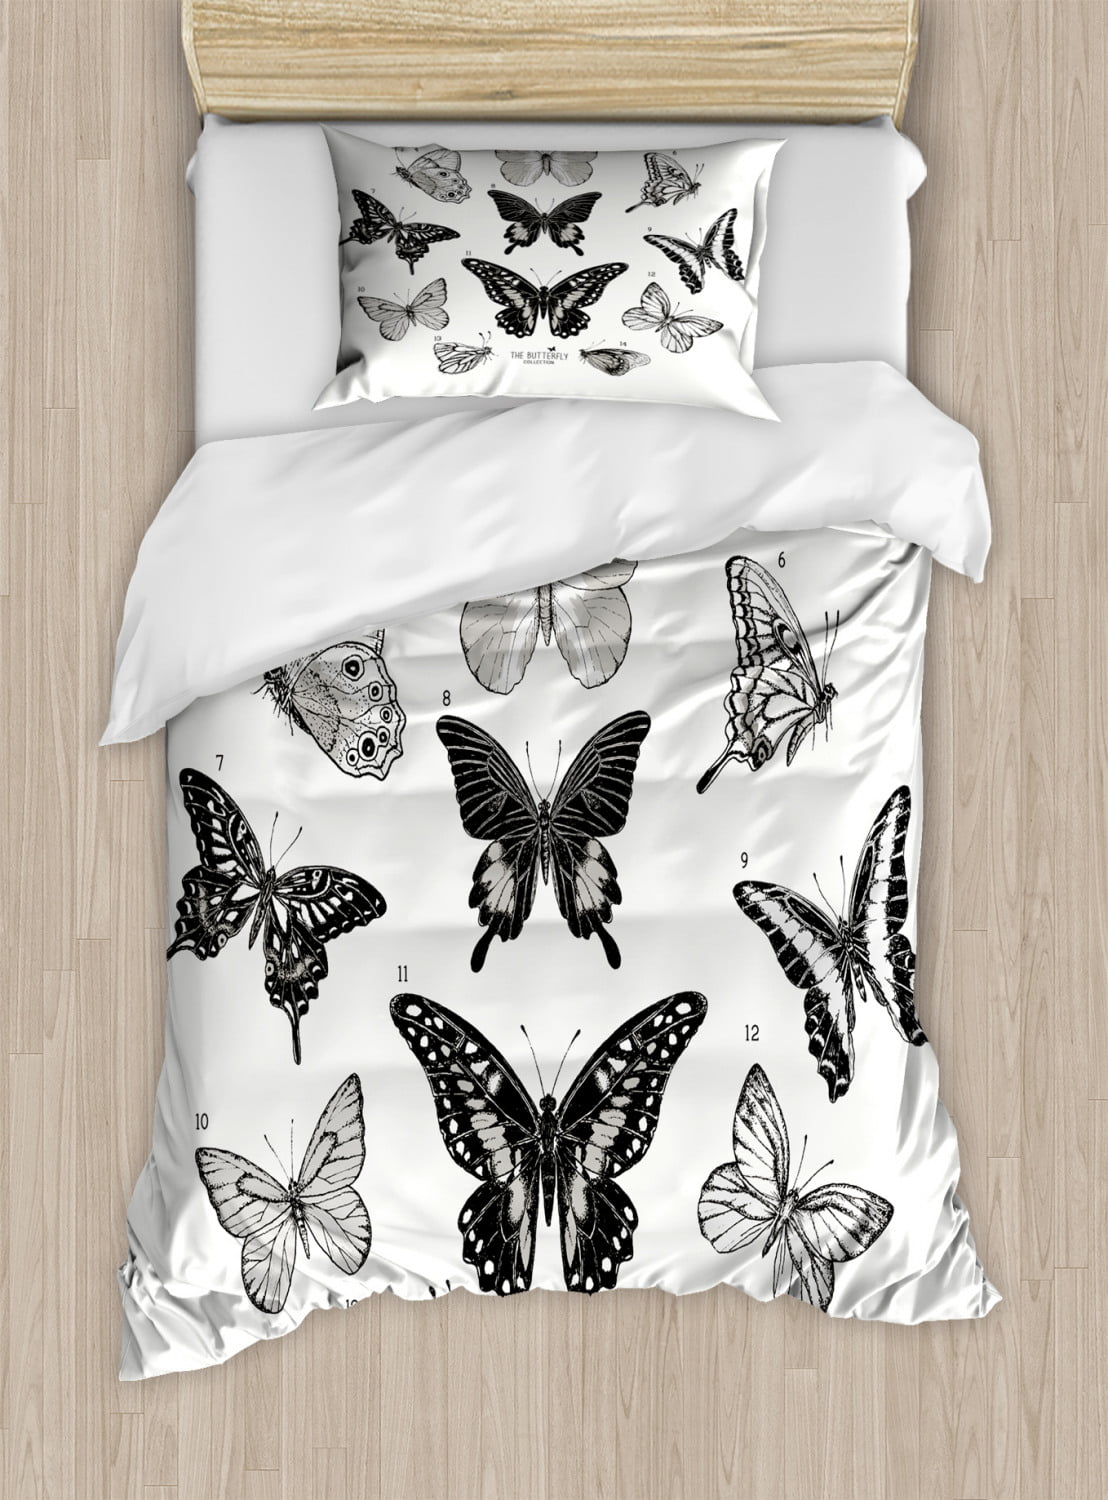 NEW FASHION  BUTTERFLY DUVET COVER+PILLOW CASES OR WITH SHEET OR CURTAINS 